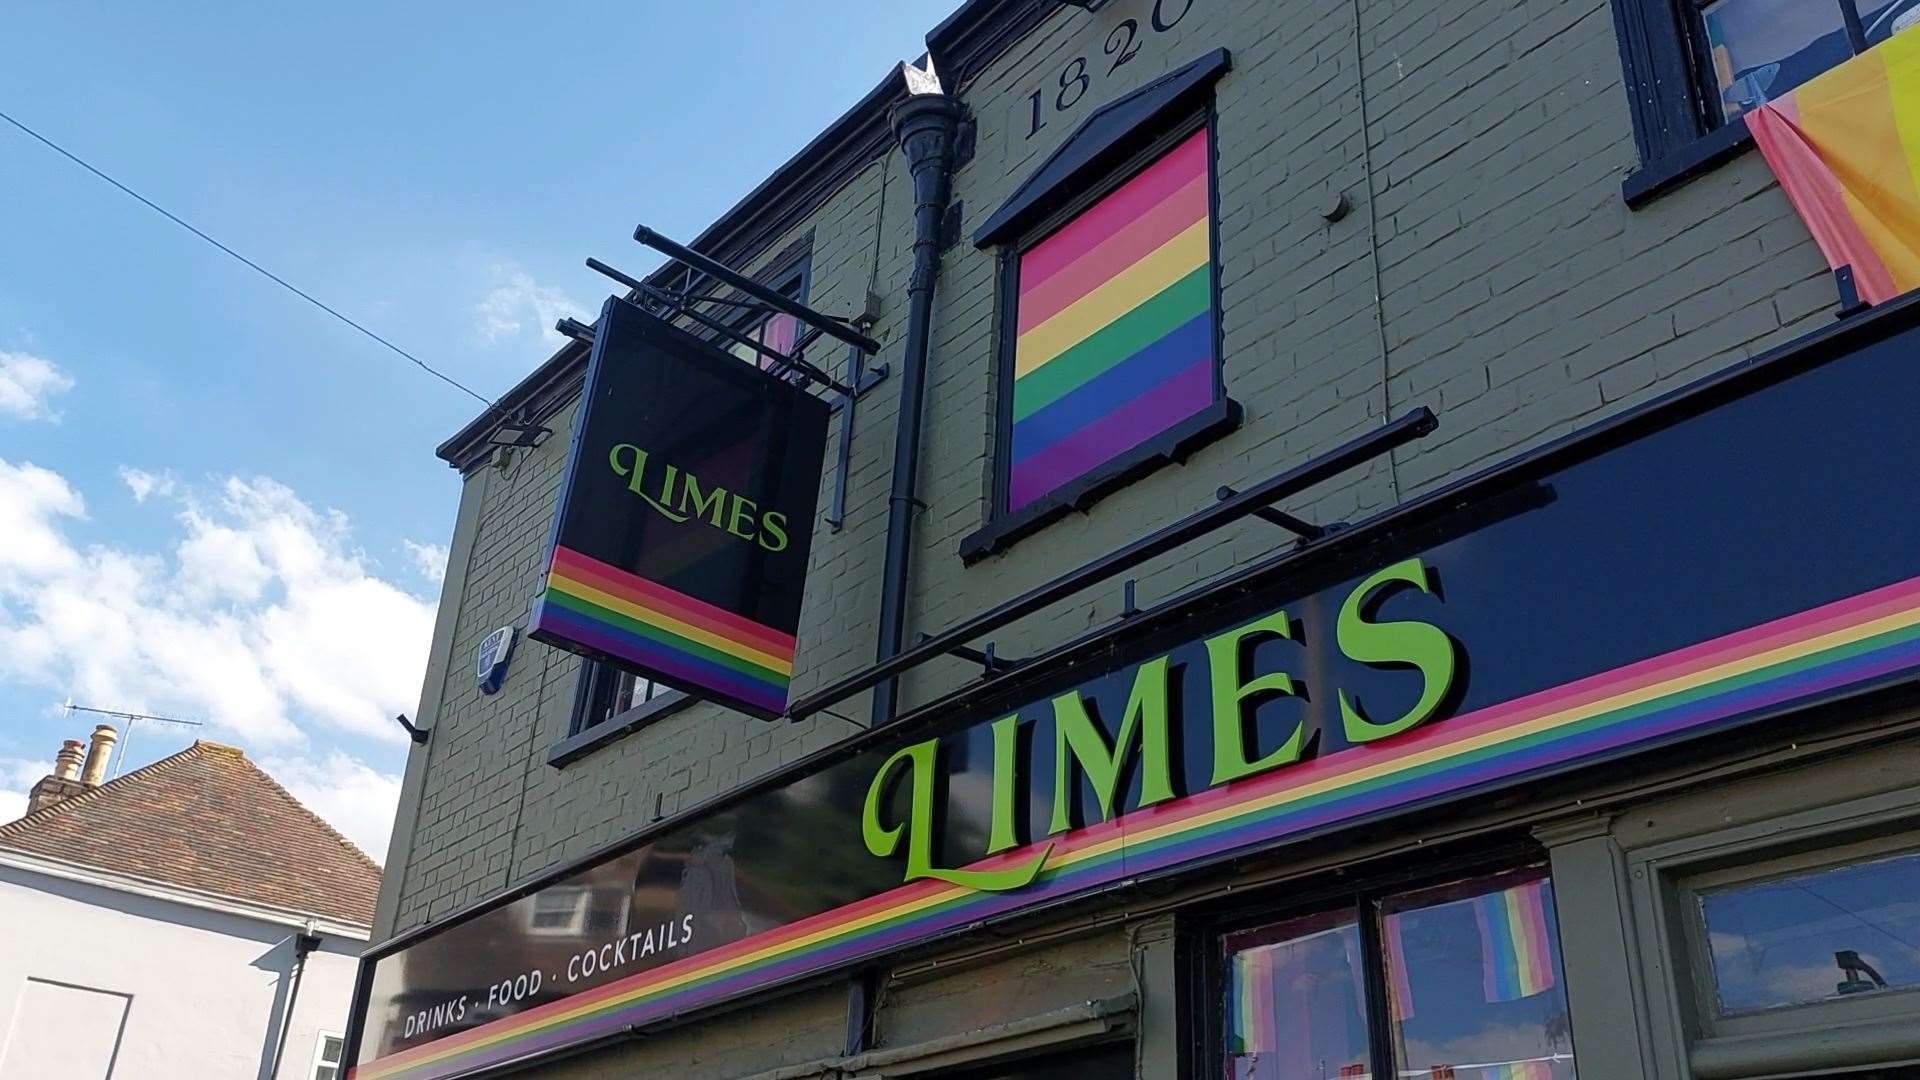 Limes Lounge is Canterbury's only gay bar